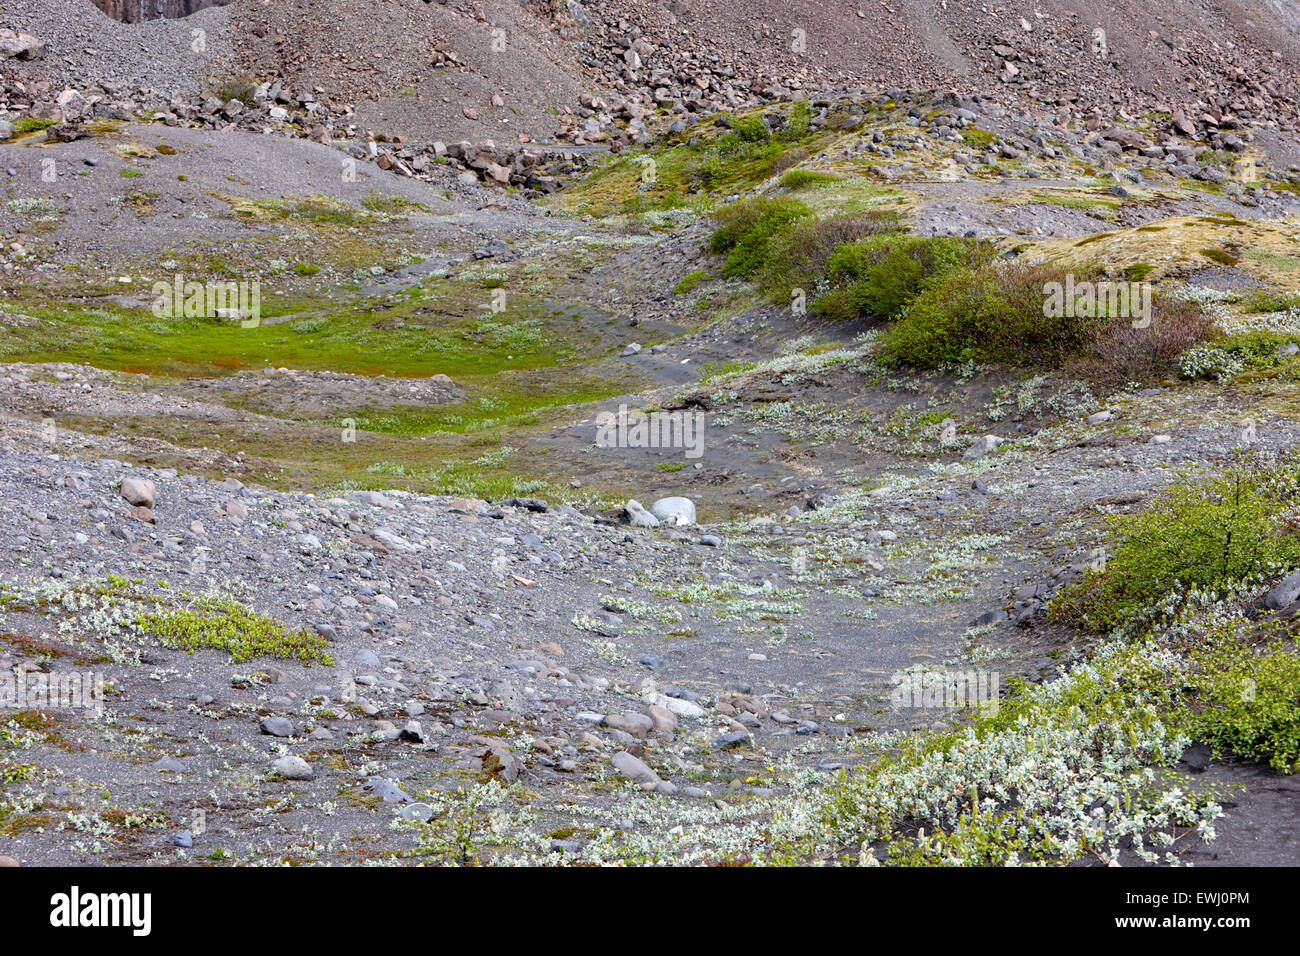 empty kettle hole rock formations filling with moss and plants left behind by glacier Iceland Stock Photo